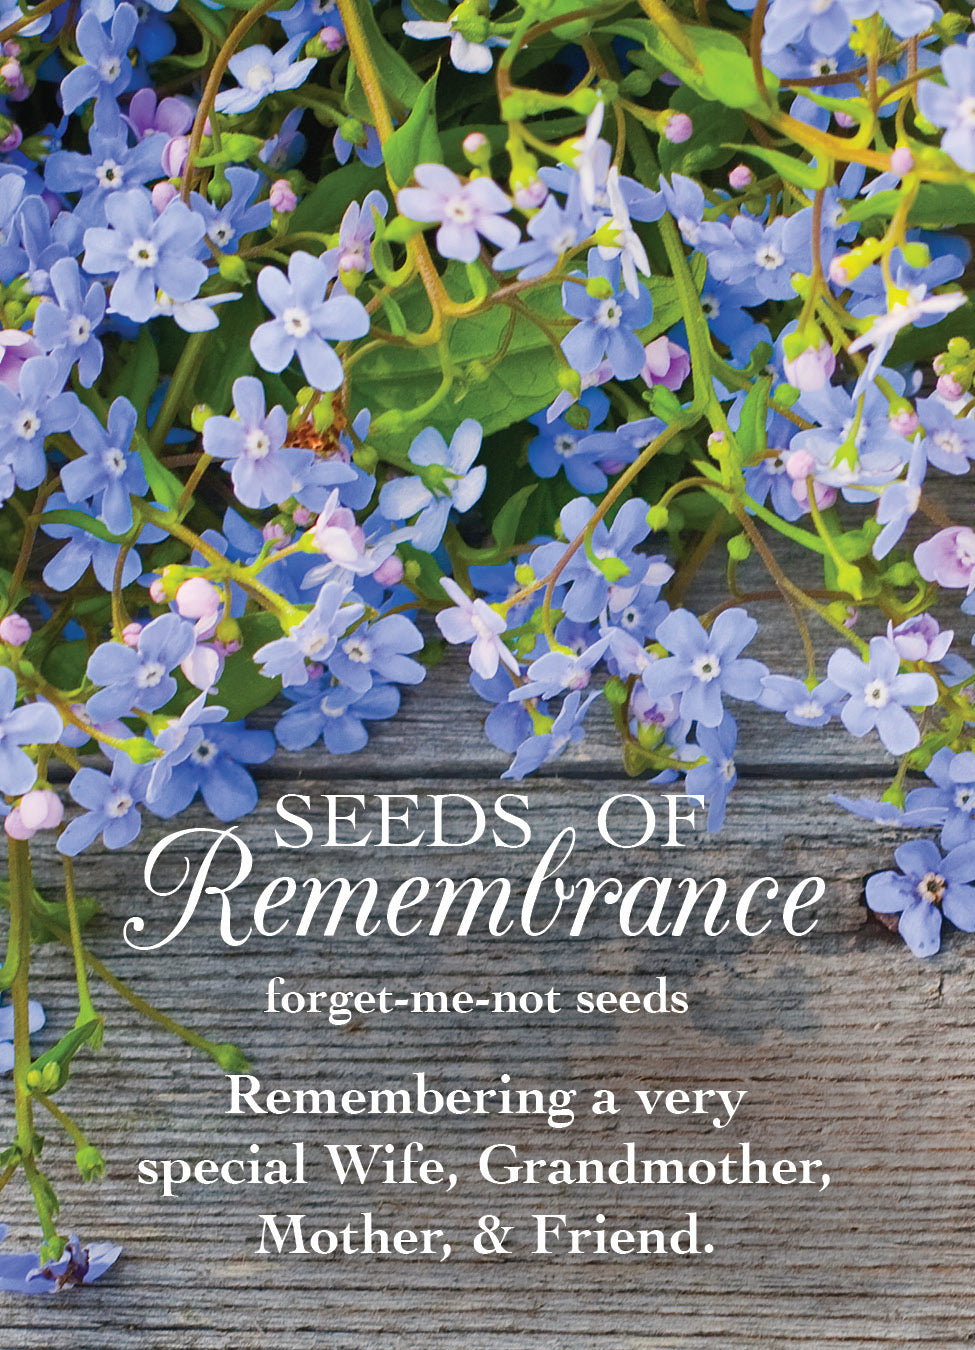 Forget Me Not Personalized Seed Packets